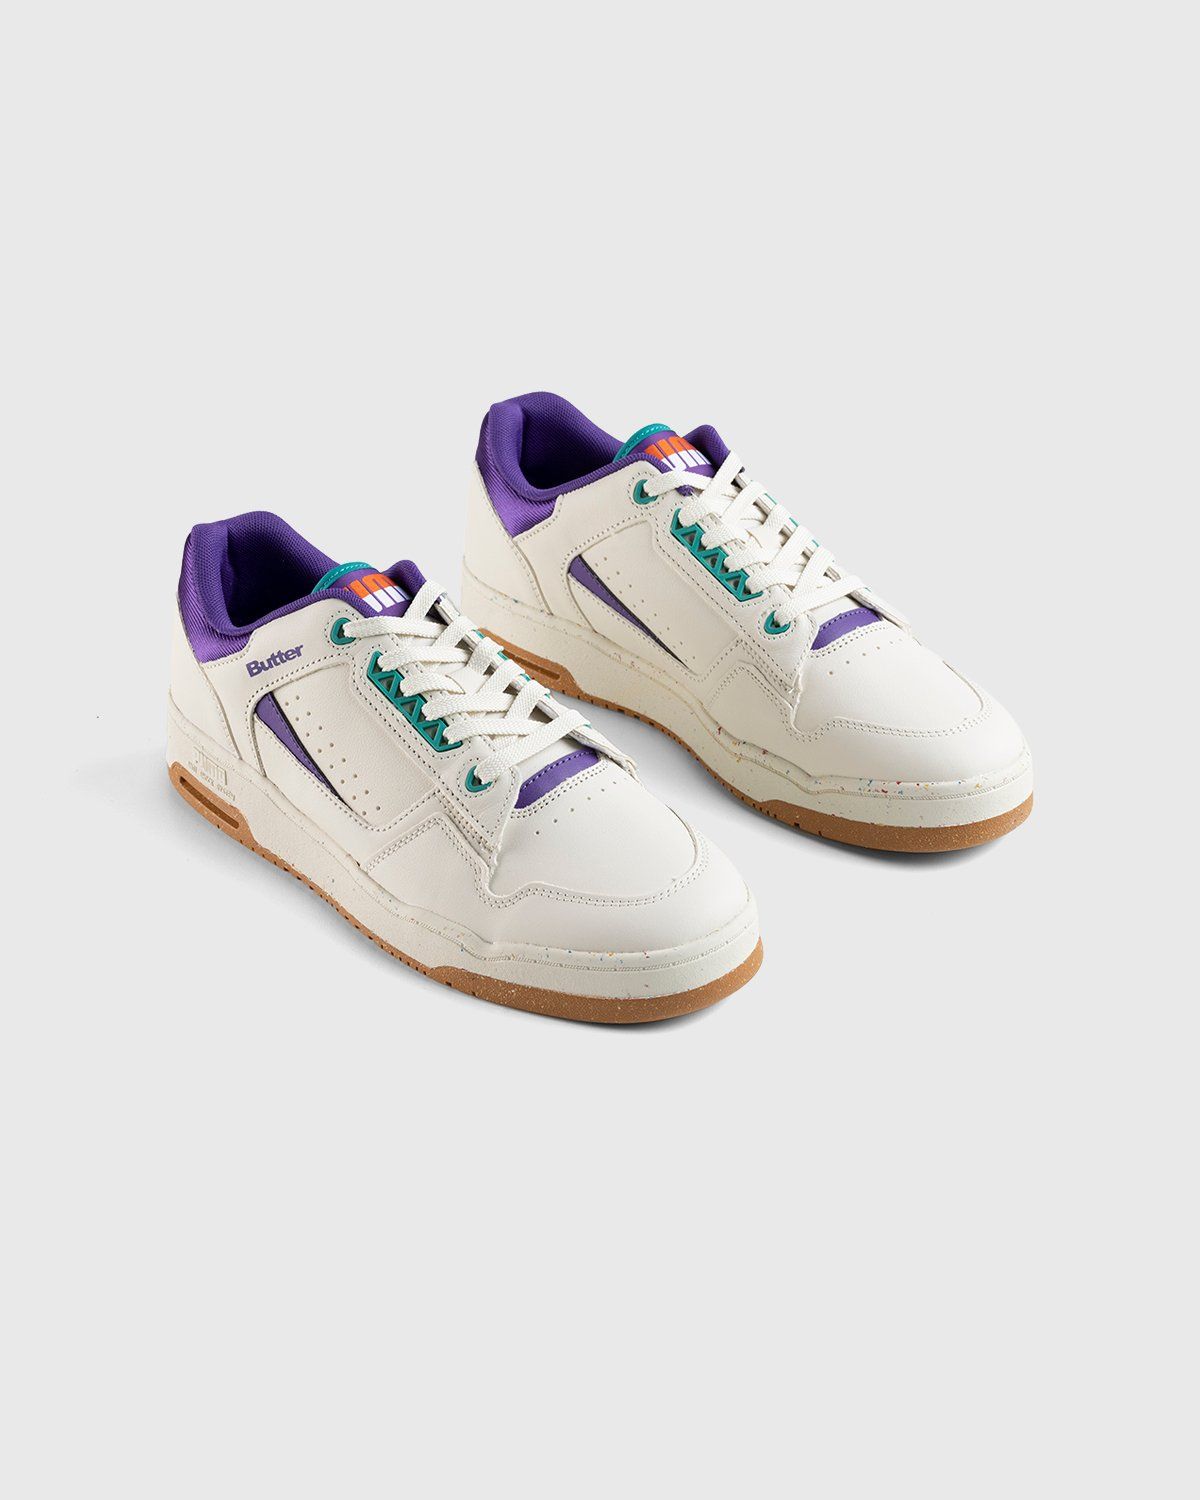 Puma x Butter Goods – Slipstream Lo Whisper White/Prism Violet/Navigate - Low Top Sneakers - Black - Image 3